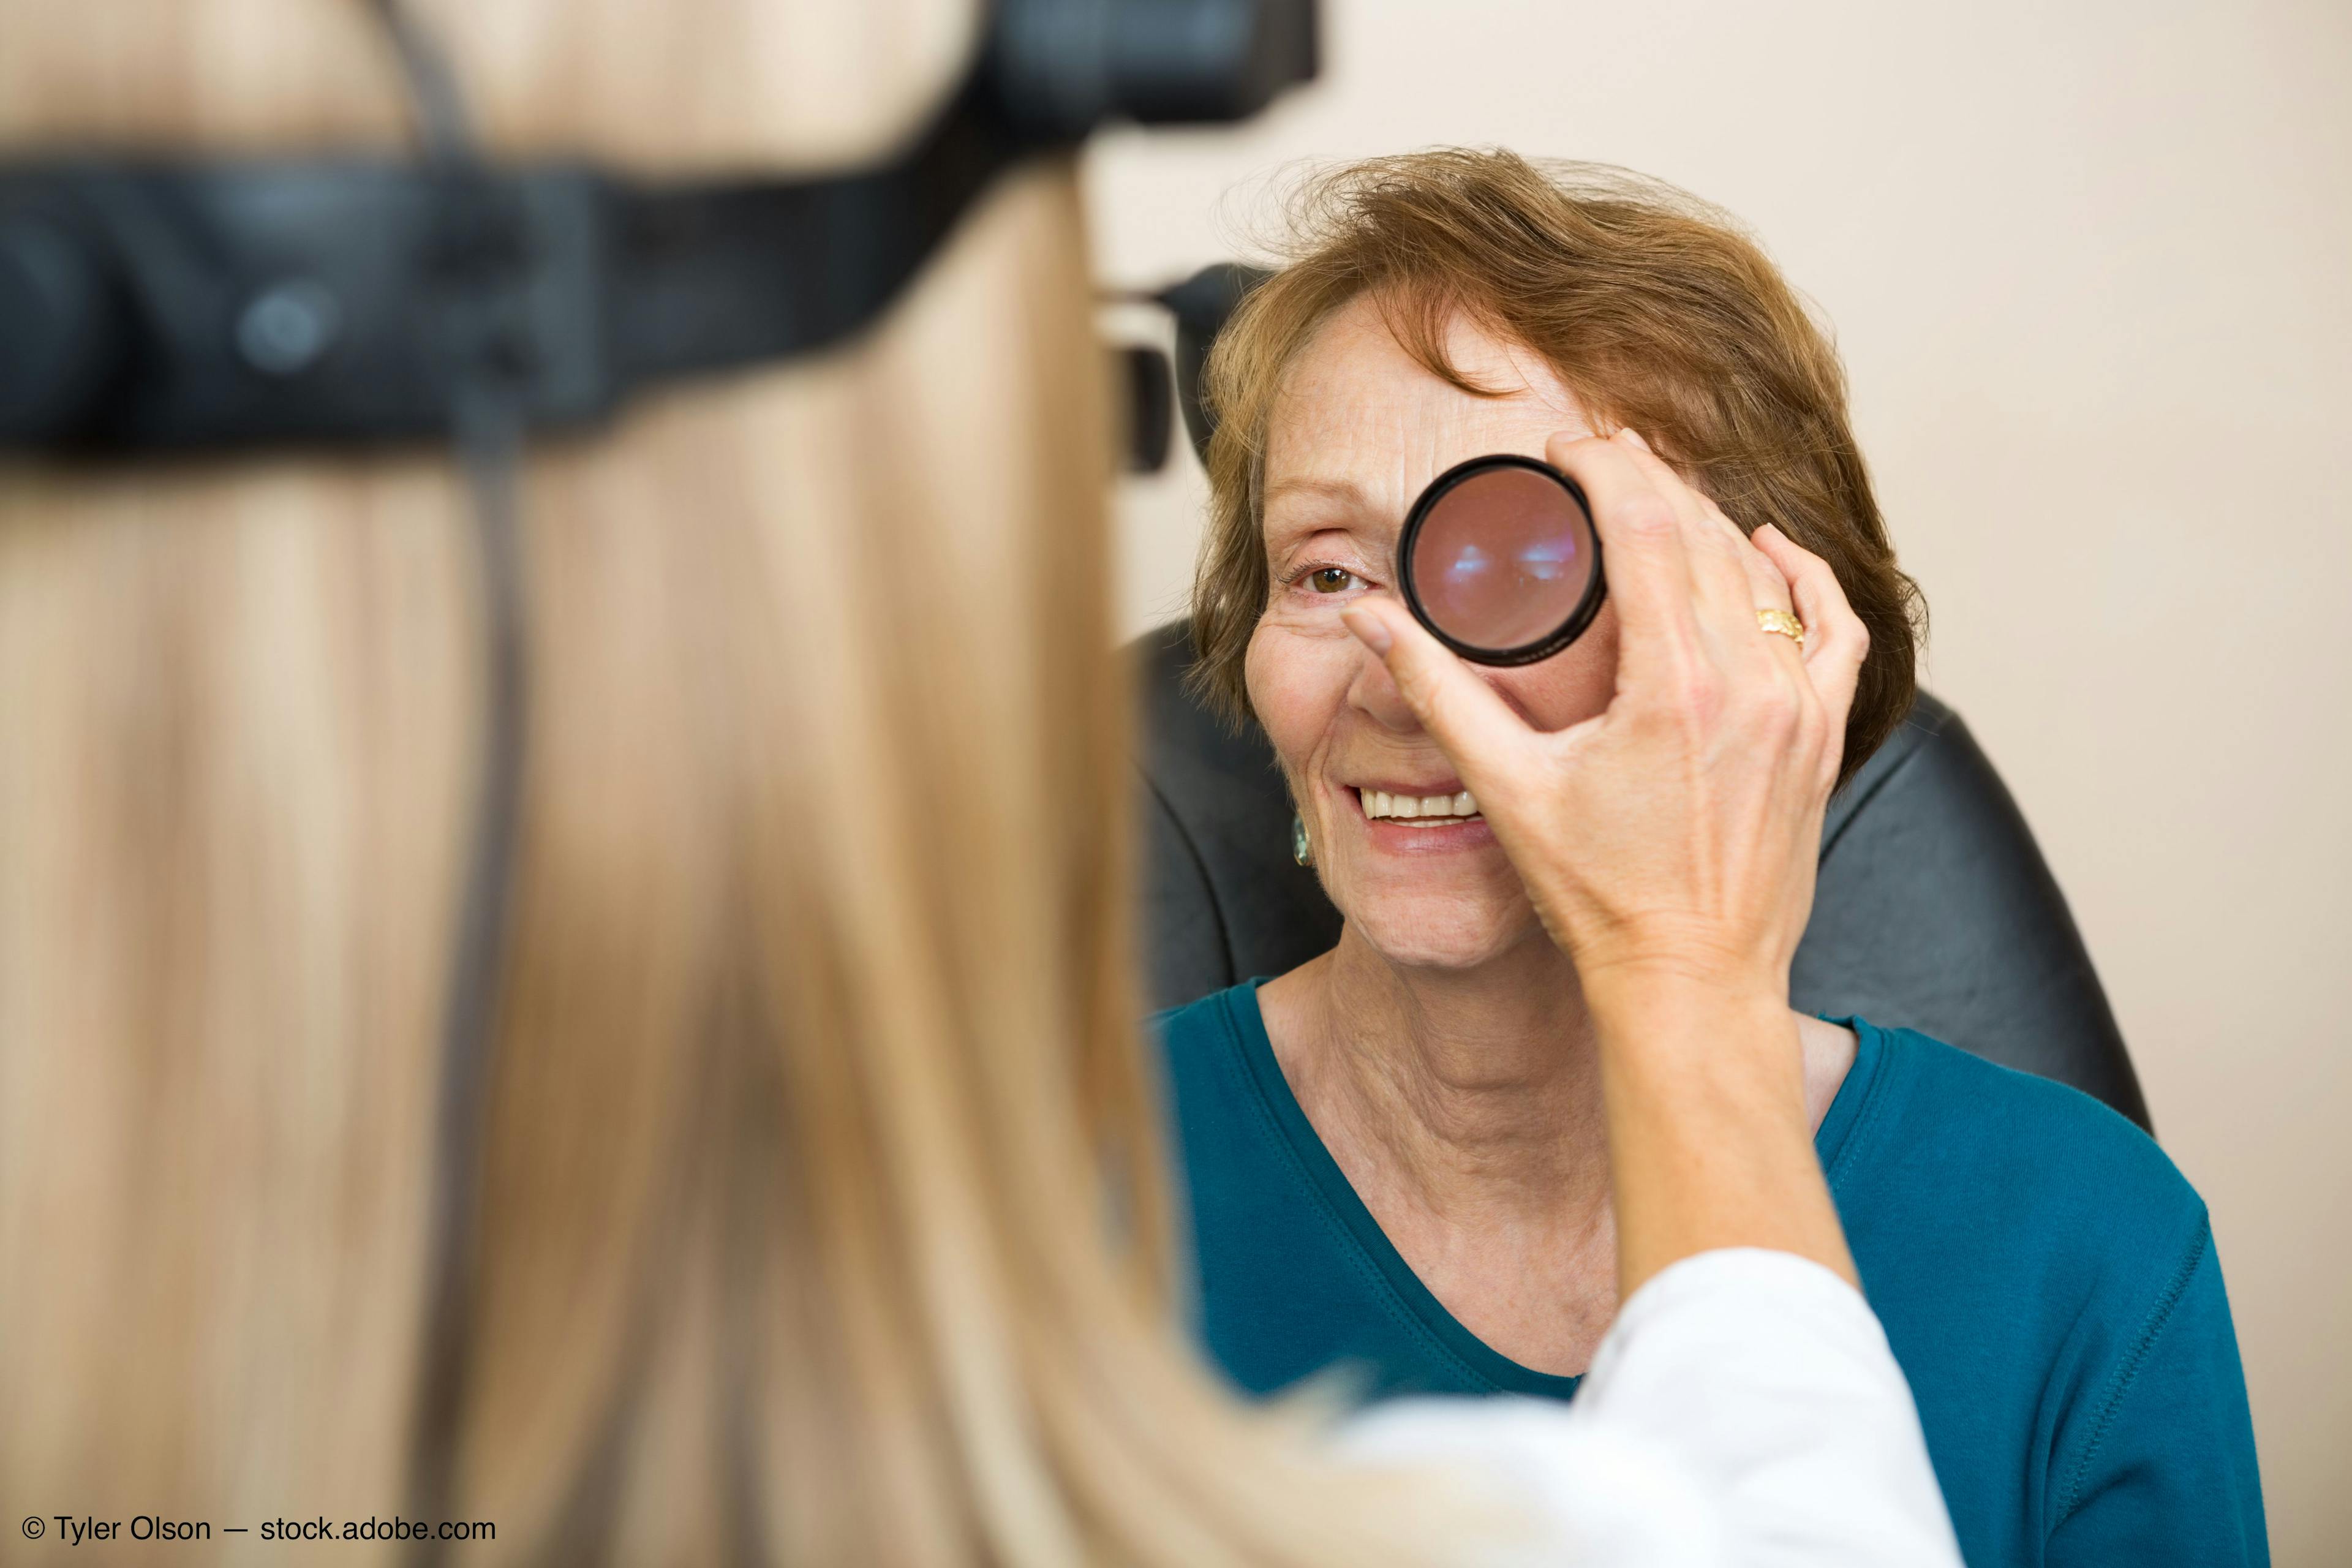 Investigators show long-term visual declines in DME eyes